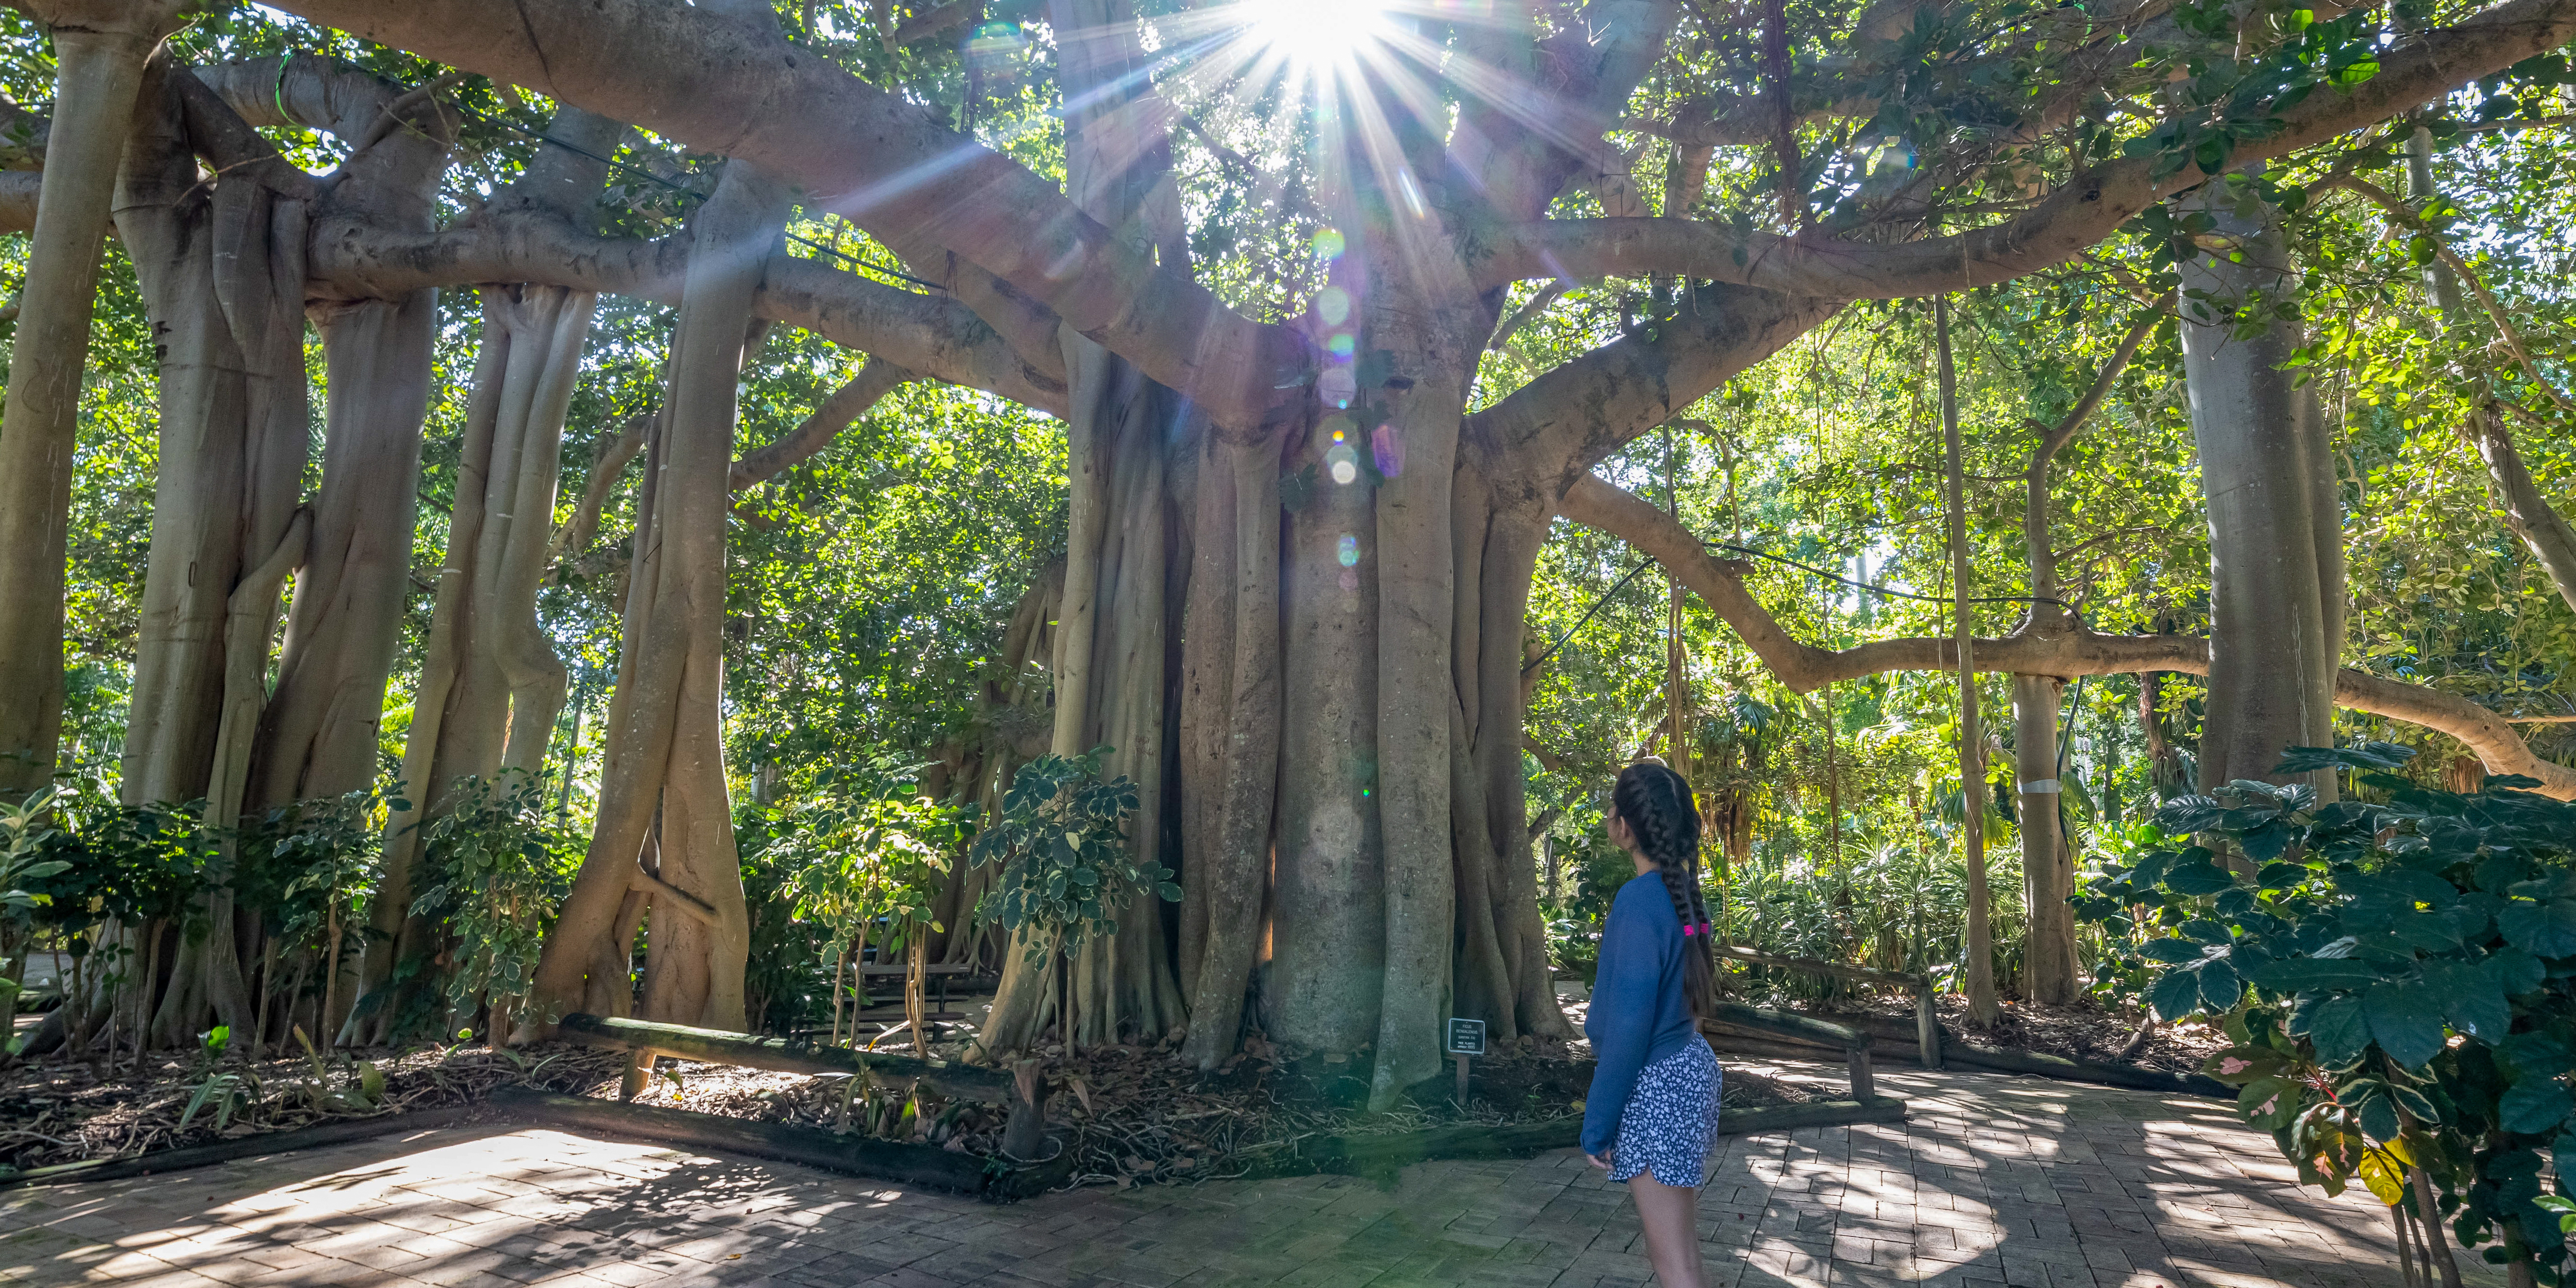 Young person looking up at the large Banyan Fig as the sunlight filters through the leaves.